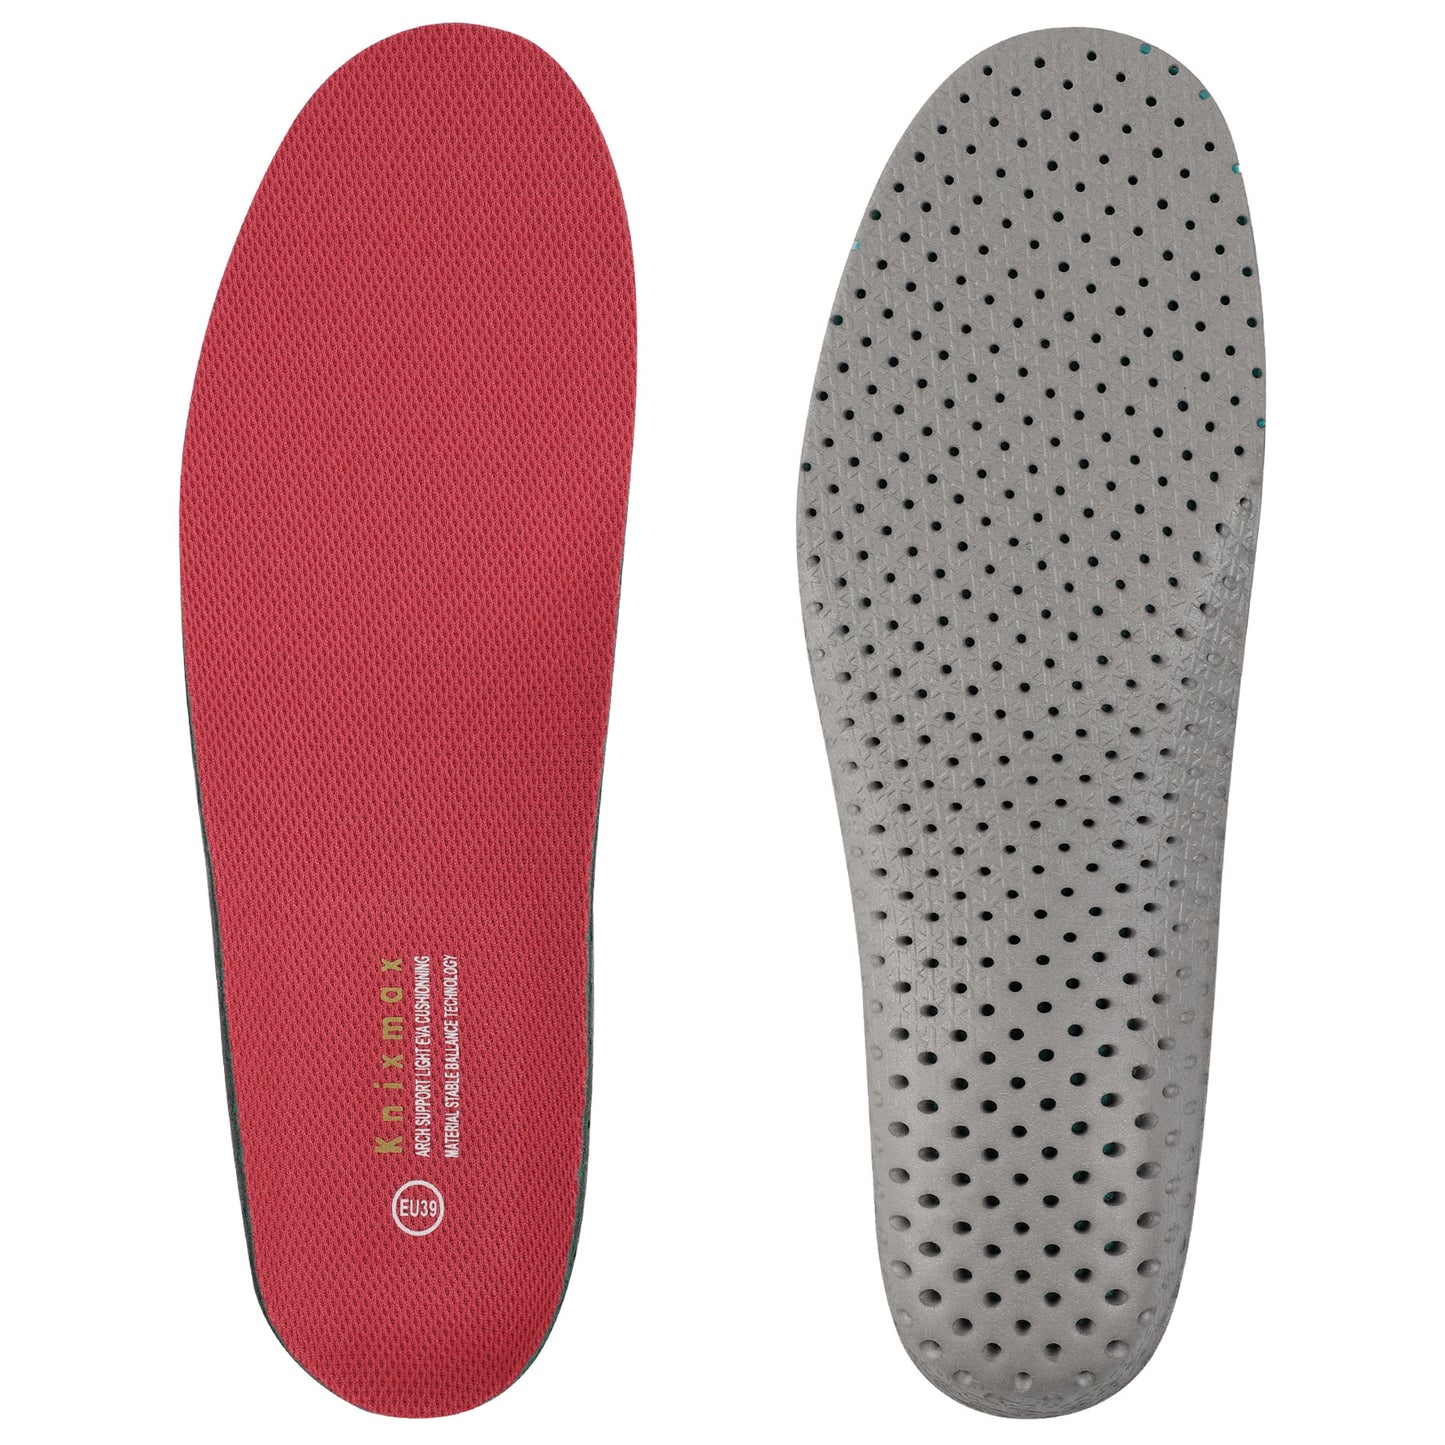 Knixmax Sports Insoles Rose Arch Support Full Length Orthotic Inserts for Women